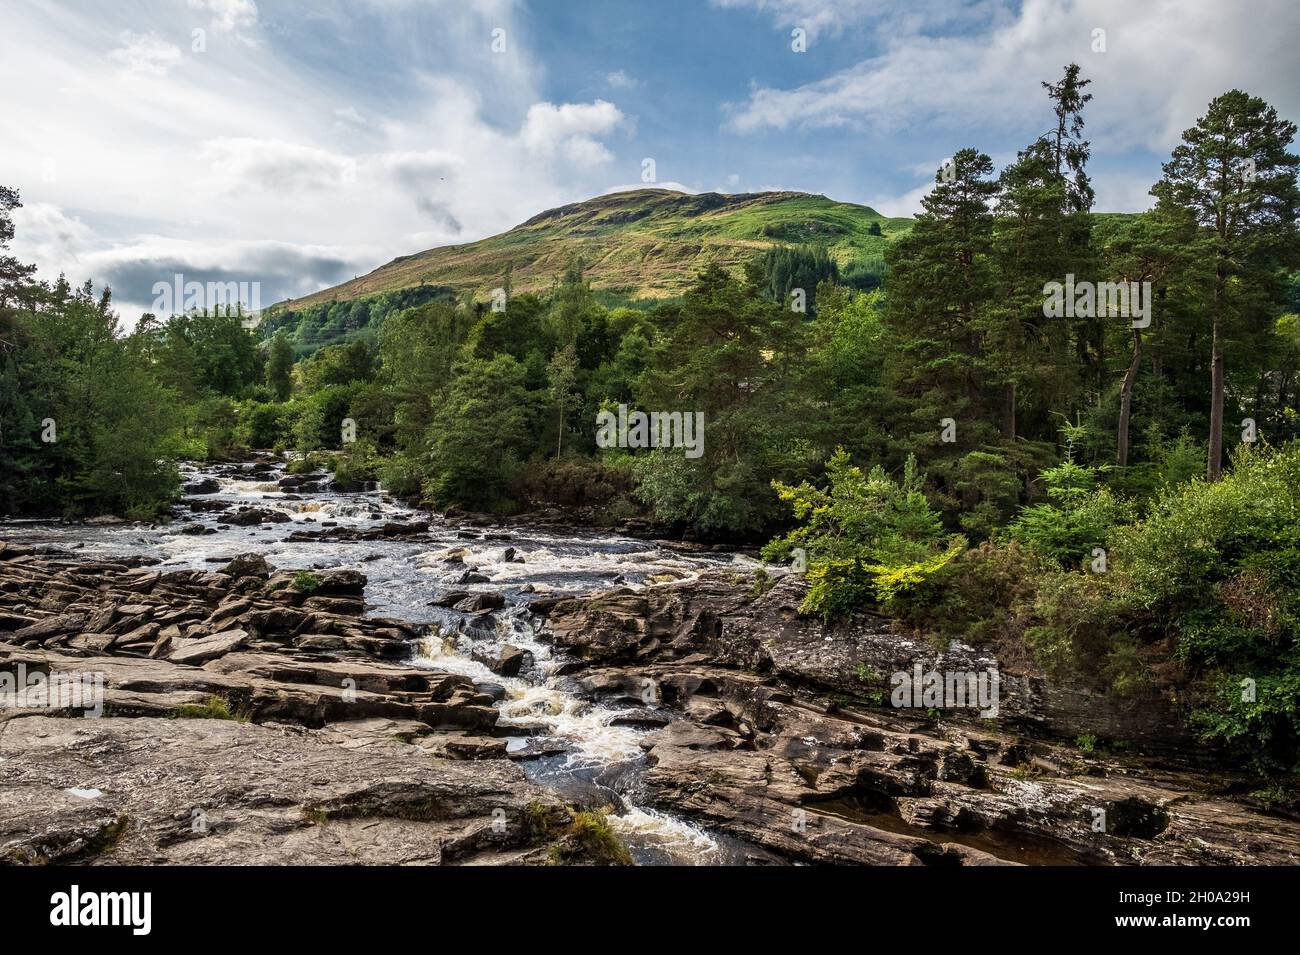 The rapids of the Falls of Dochart, on the River Dochart, just outside the village of Killin, Stirlingshire, Scotland Stock Photo